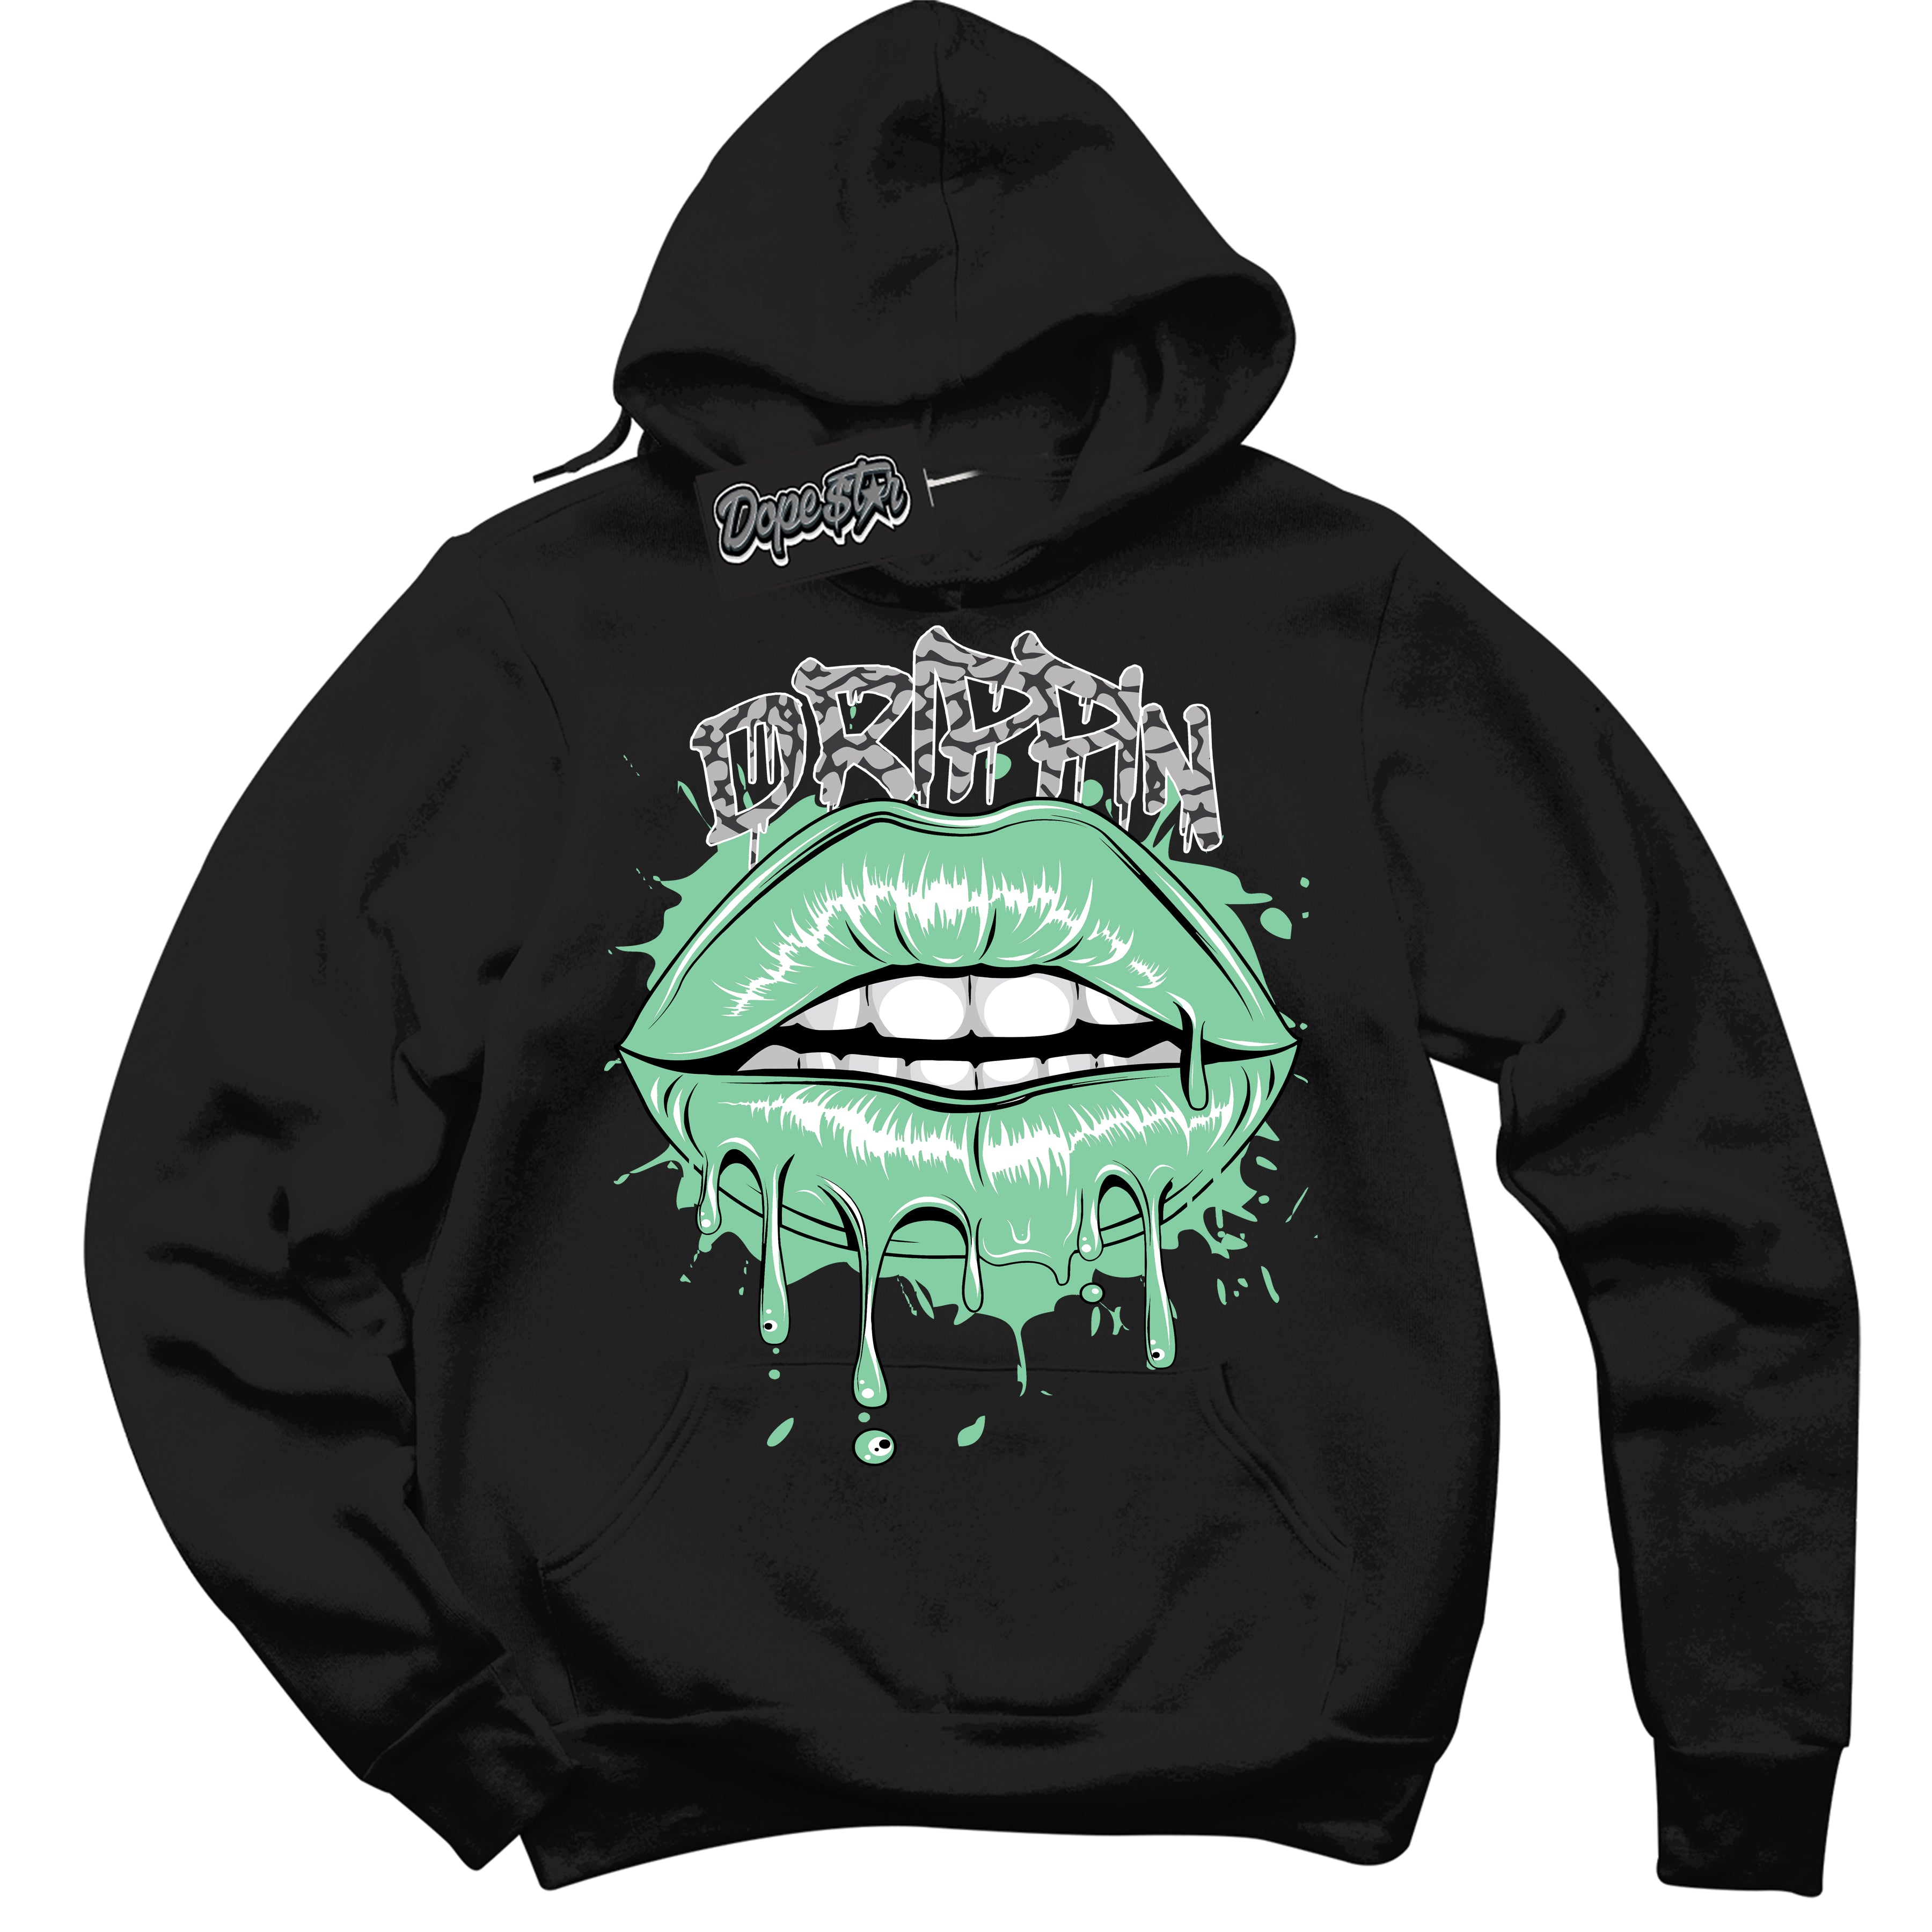 Cool Black Graphic DopeStar Hoodie with “ Drippin “ print, that perfectly matches Green Glow 3S sneakers